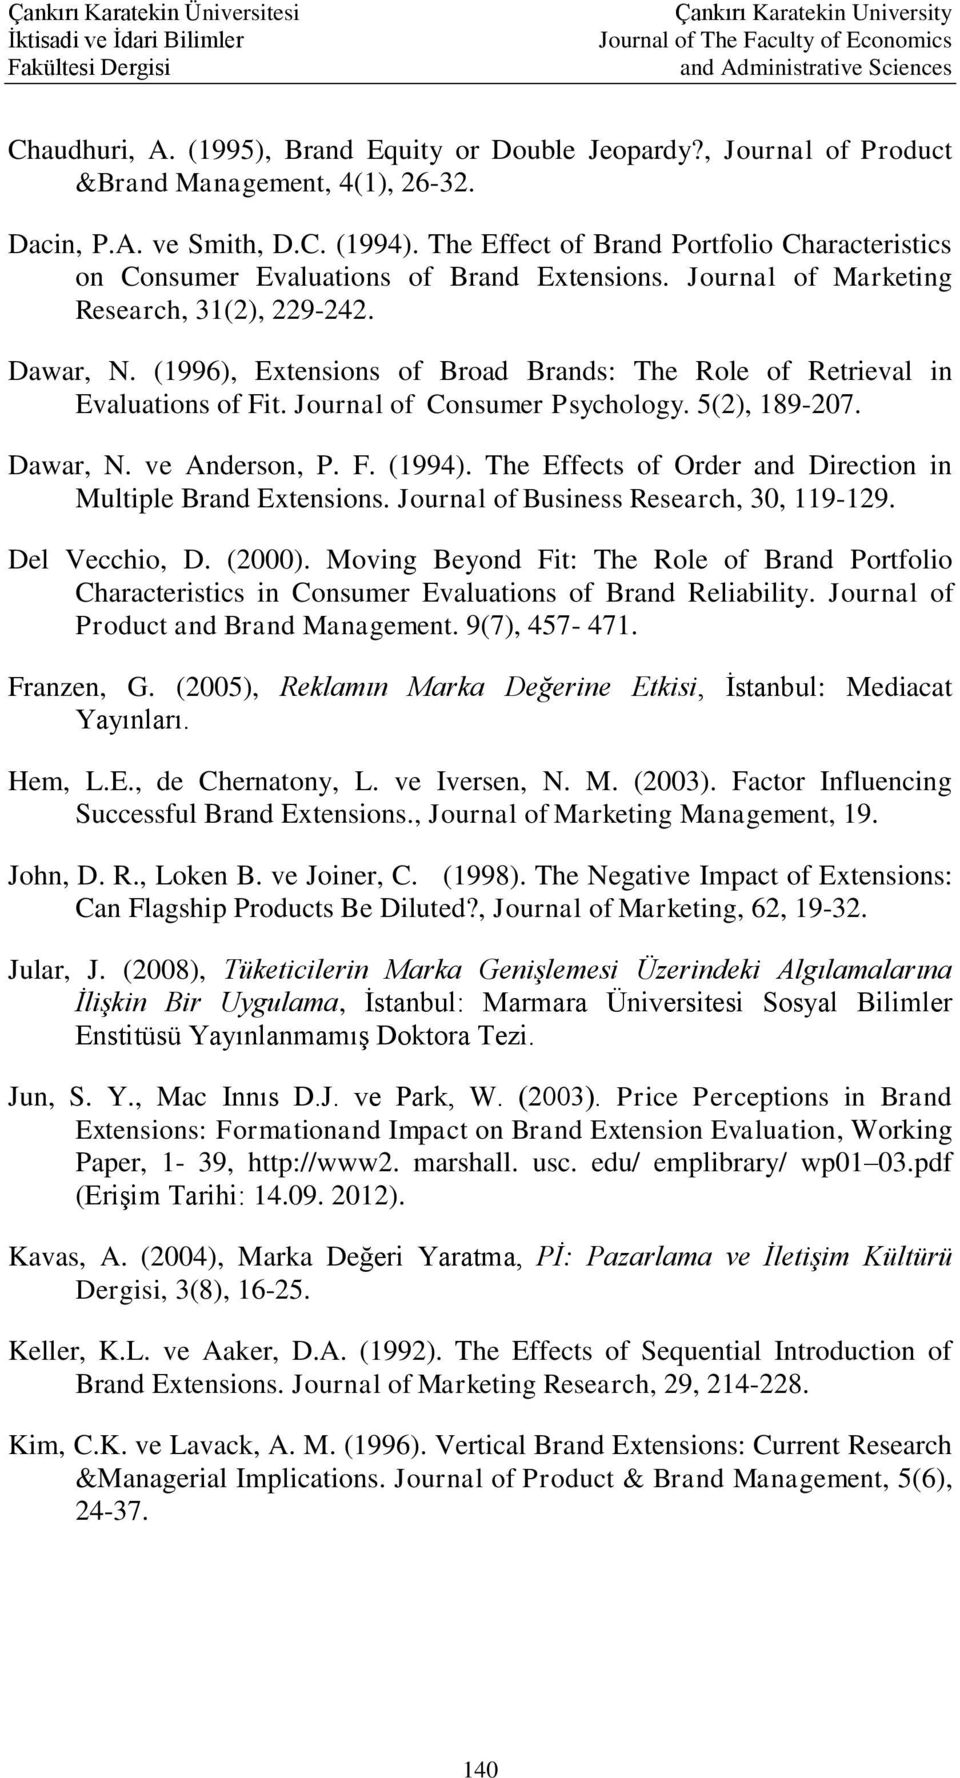 (1996), Extensions of Broad Brands: The Role of Retrieval in Evaluations of Fit. Journal of Consumer Psychology. 5(2), 189-207. Dawar, N. ve Anderson, P. F. (1994).